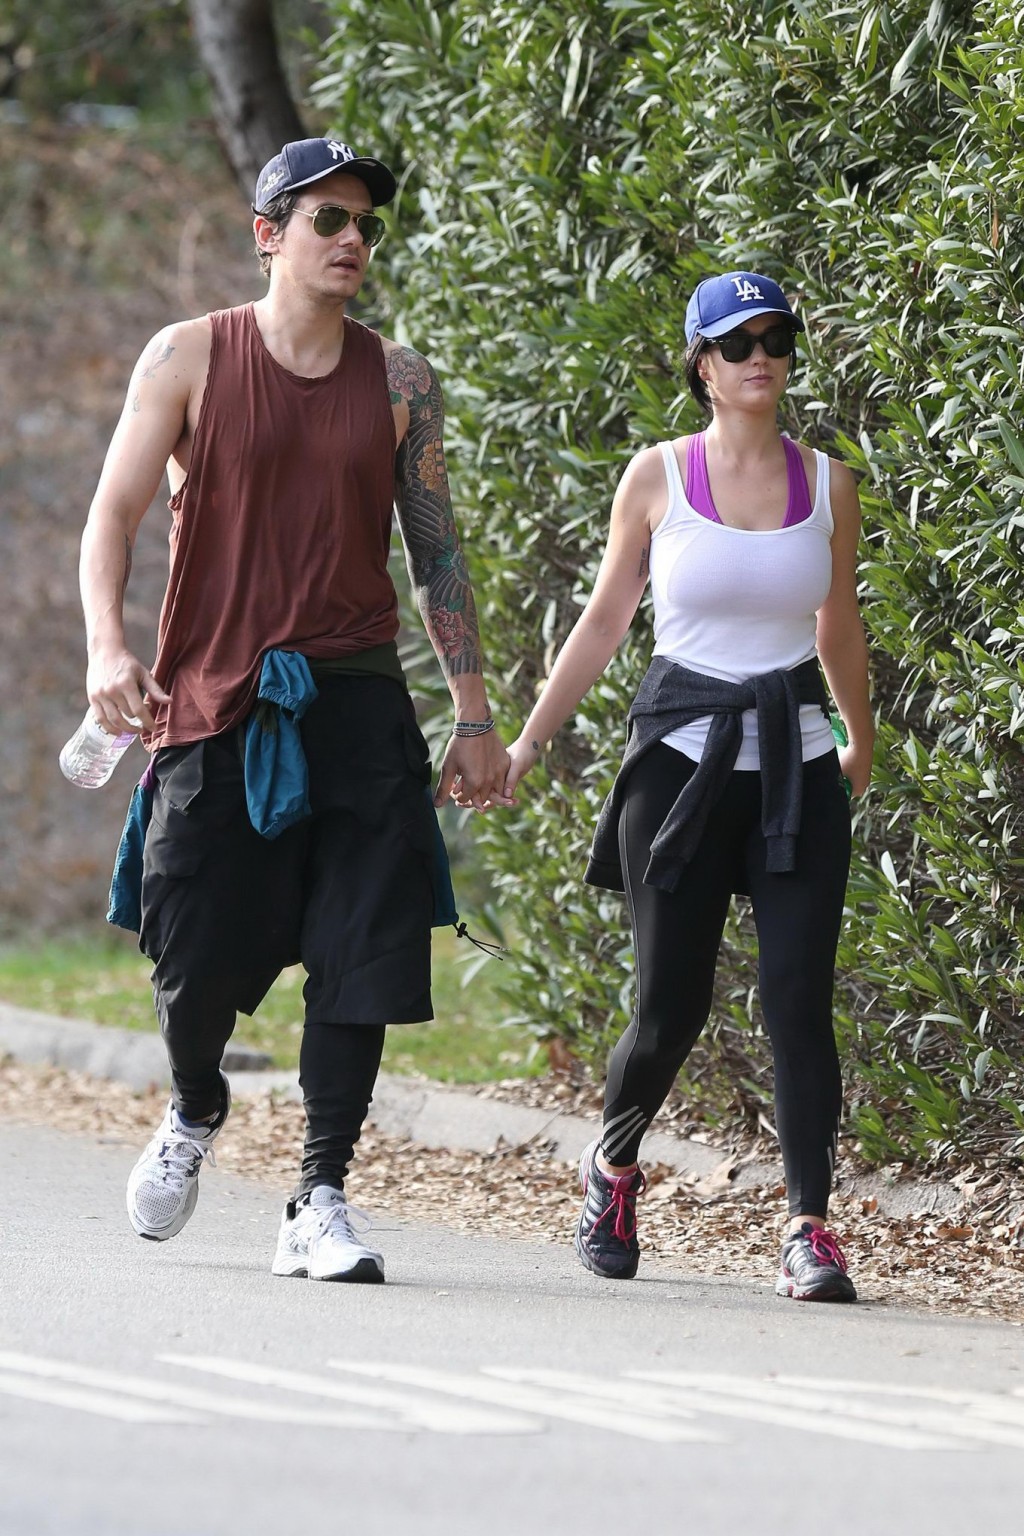 Katy Perry busty  booty wearing tight top and tights while hiking in Los Angeles #75242141